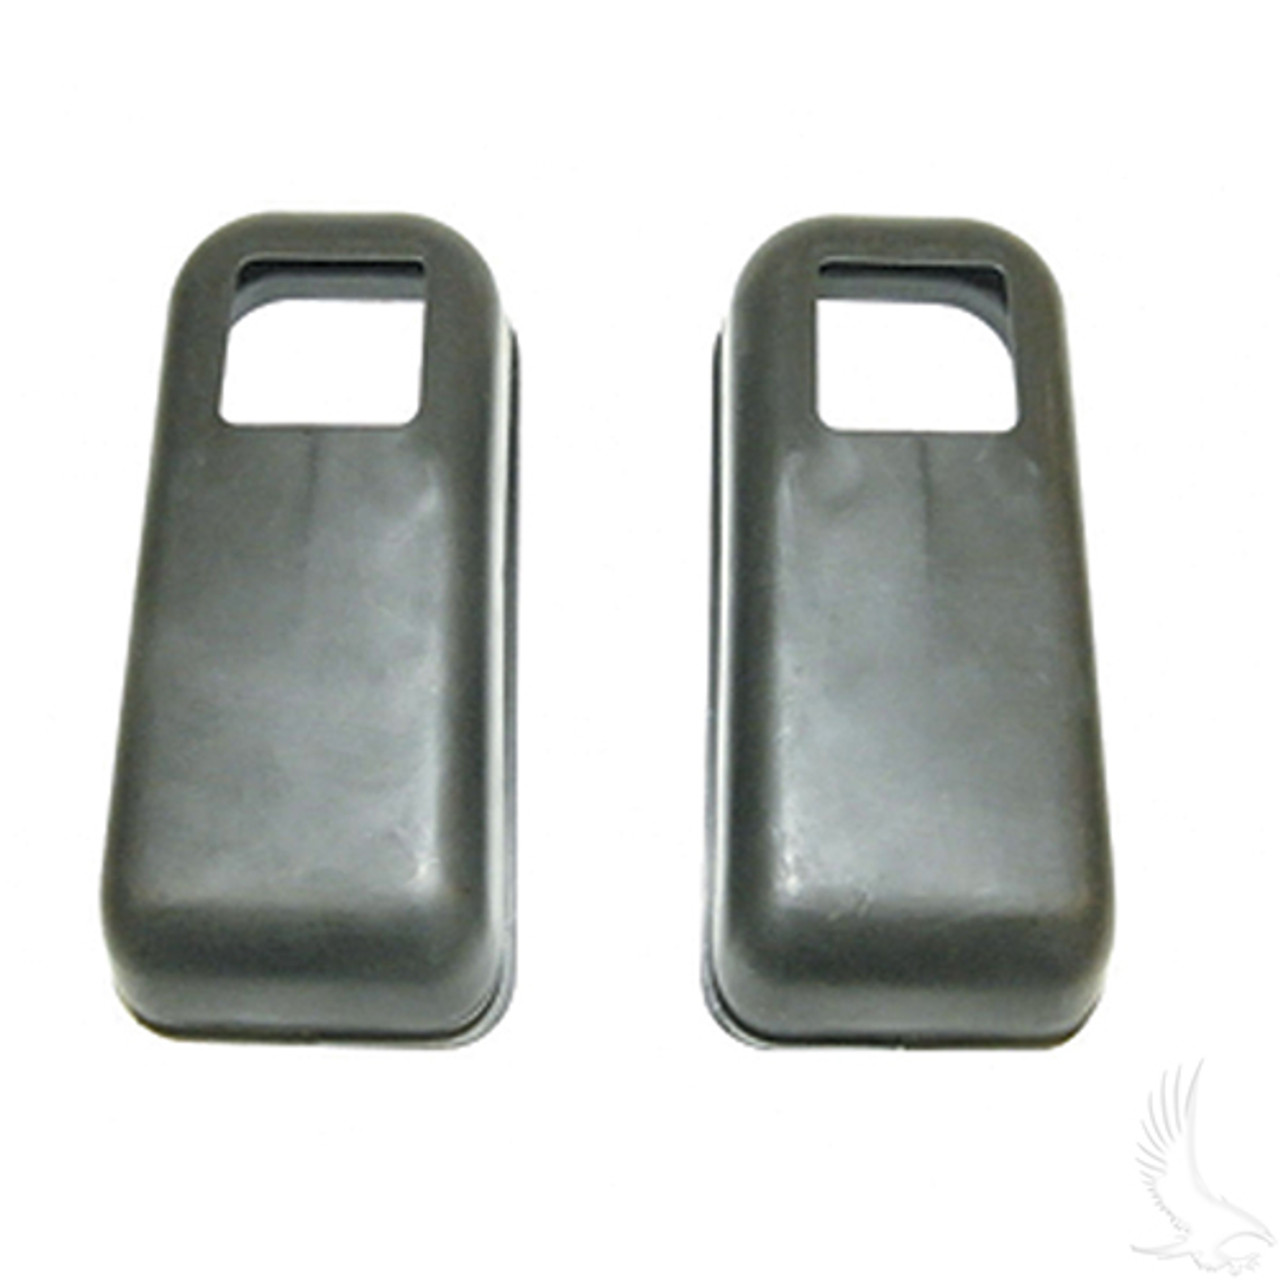 Seat Back Assembly Boot (Pack of 2) for EZGO RXV Golf Cart, BP-0200